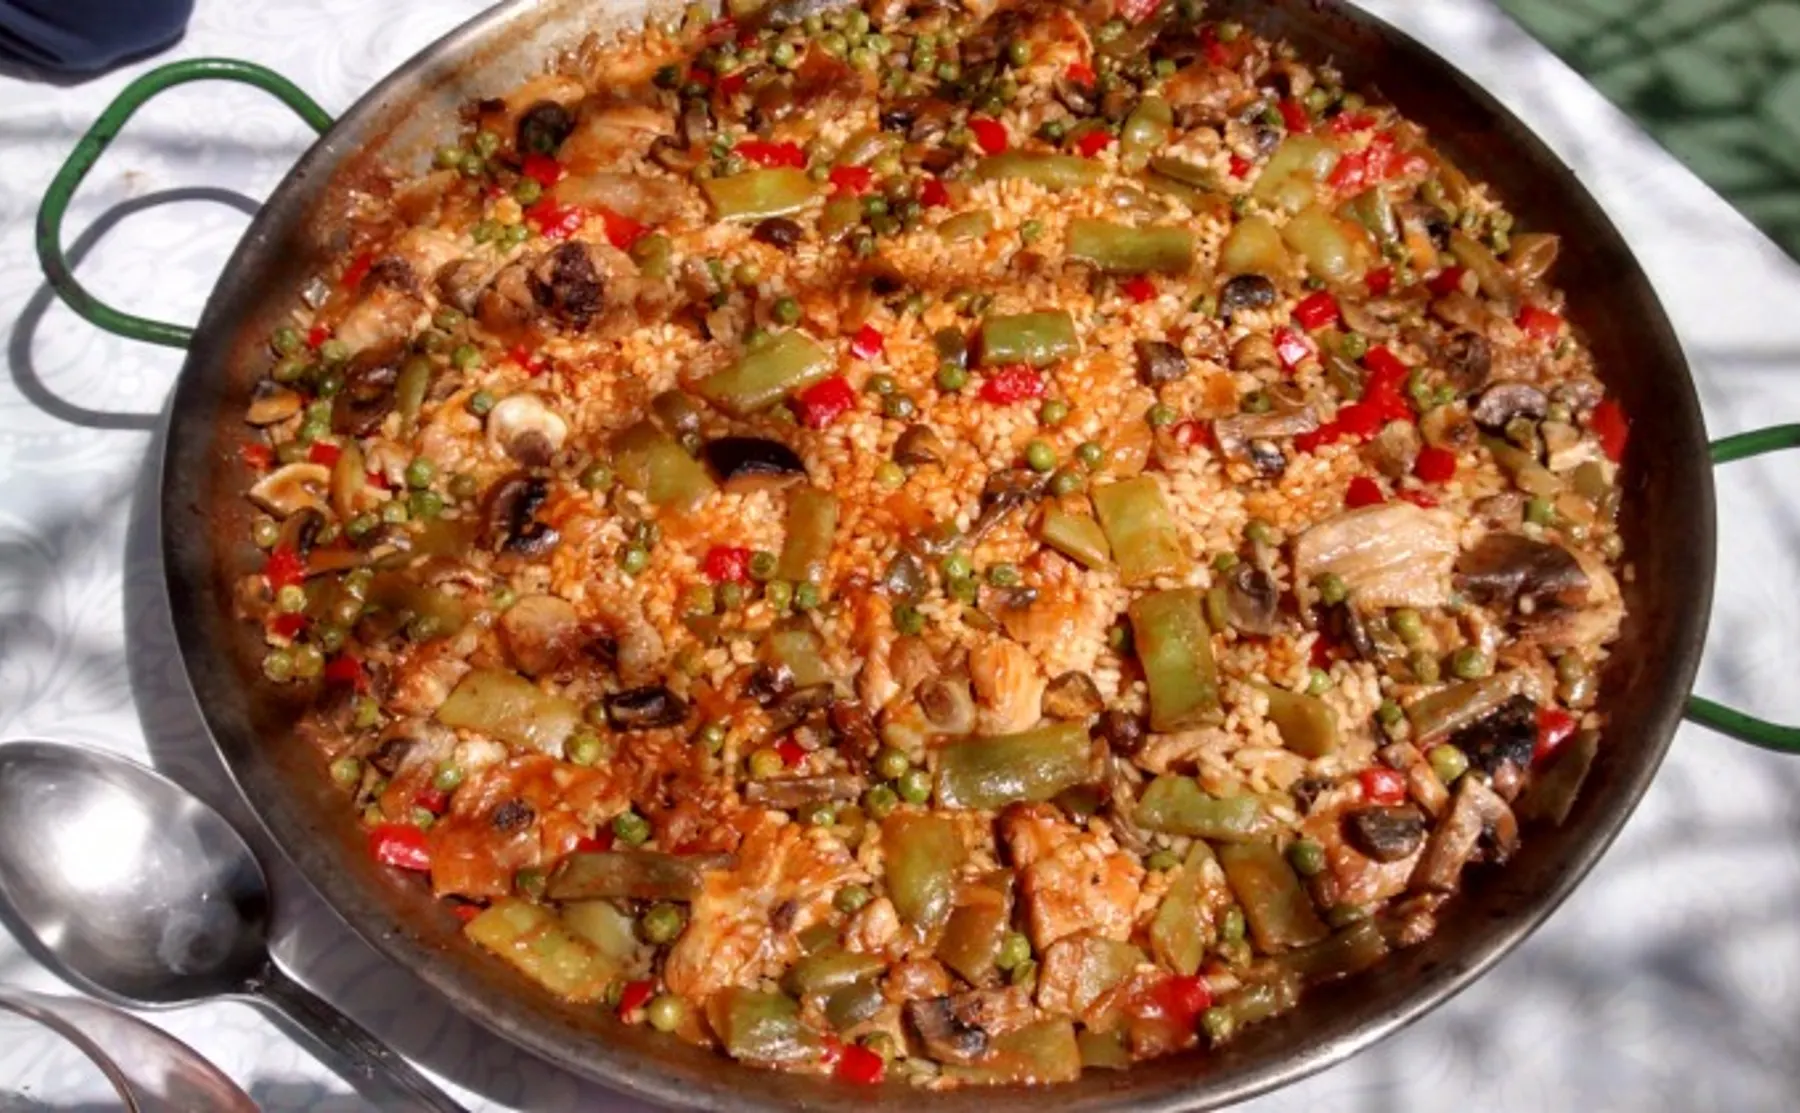 Join Me For A Classic Paella - 41156